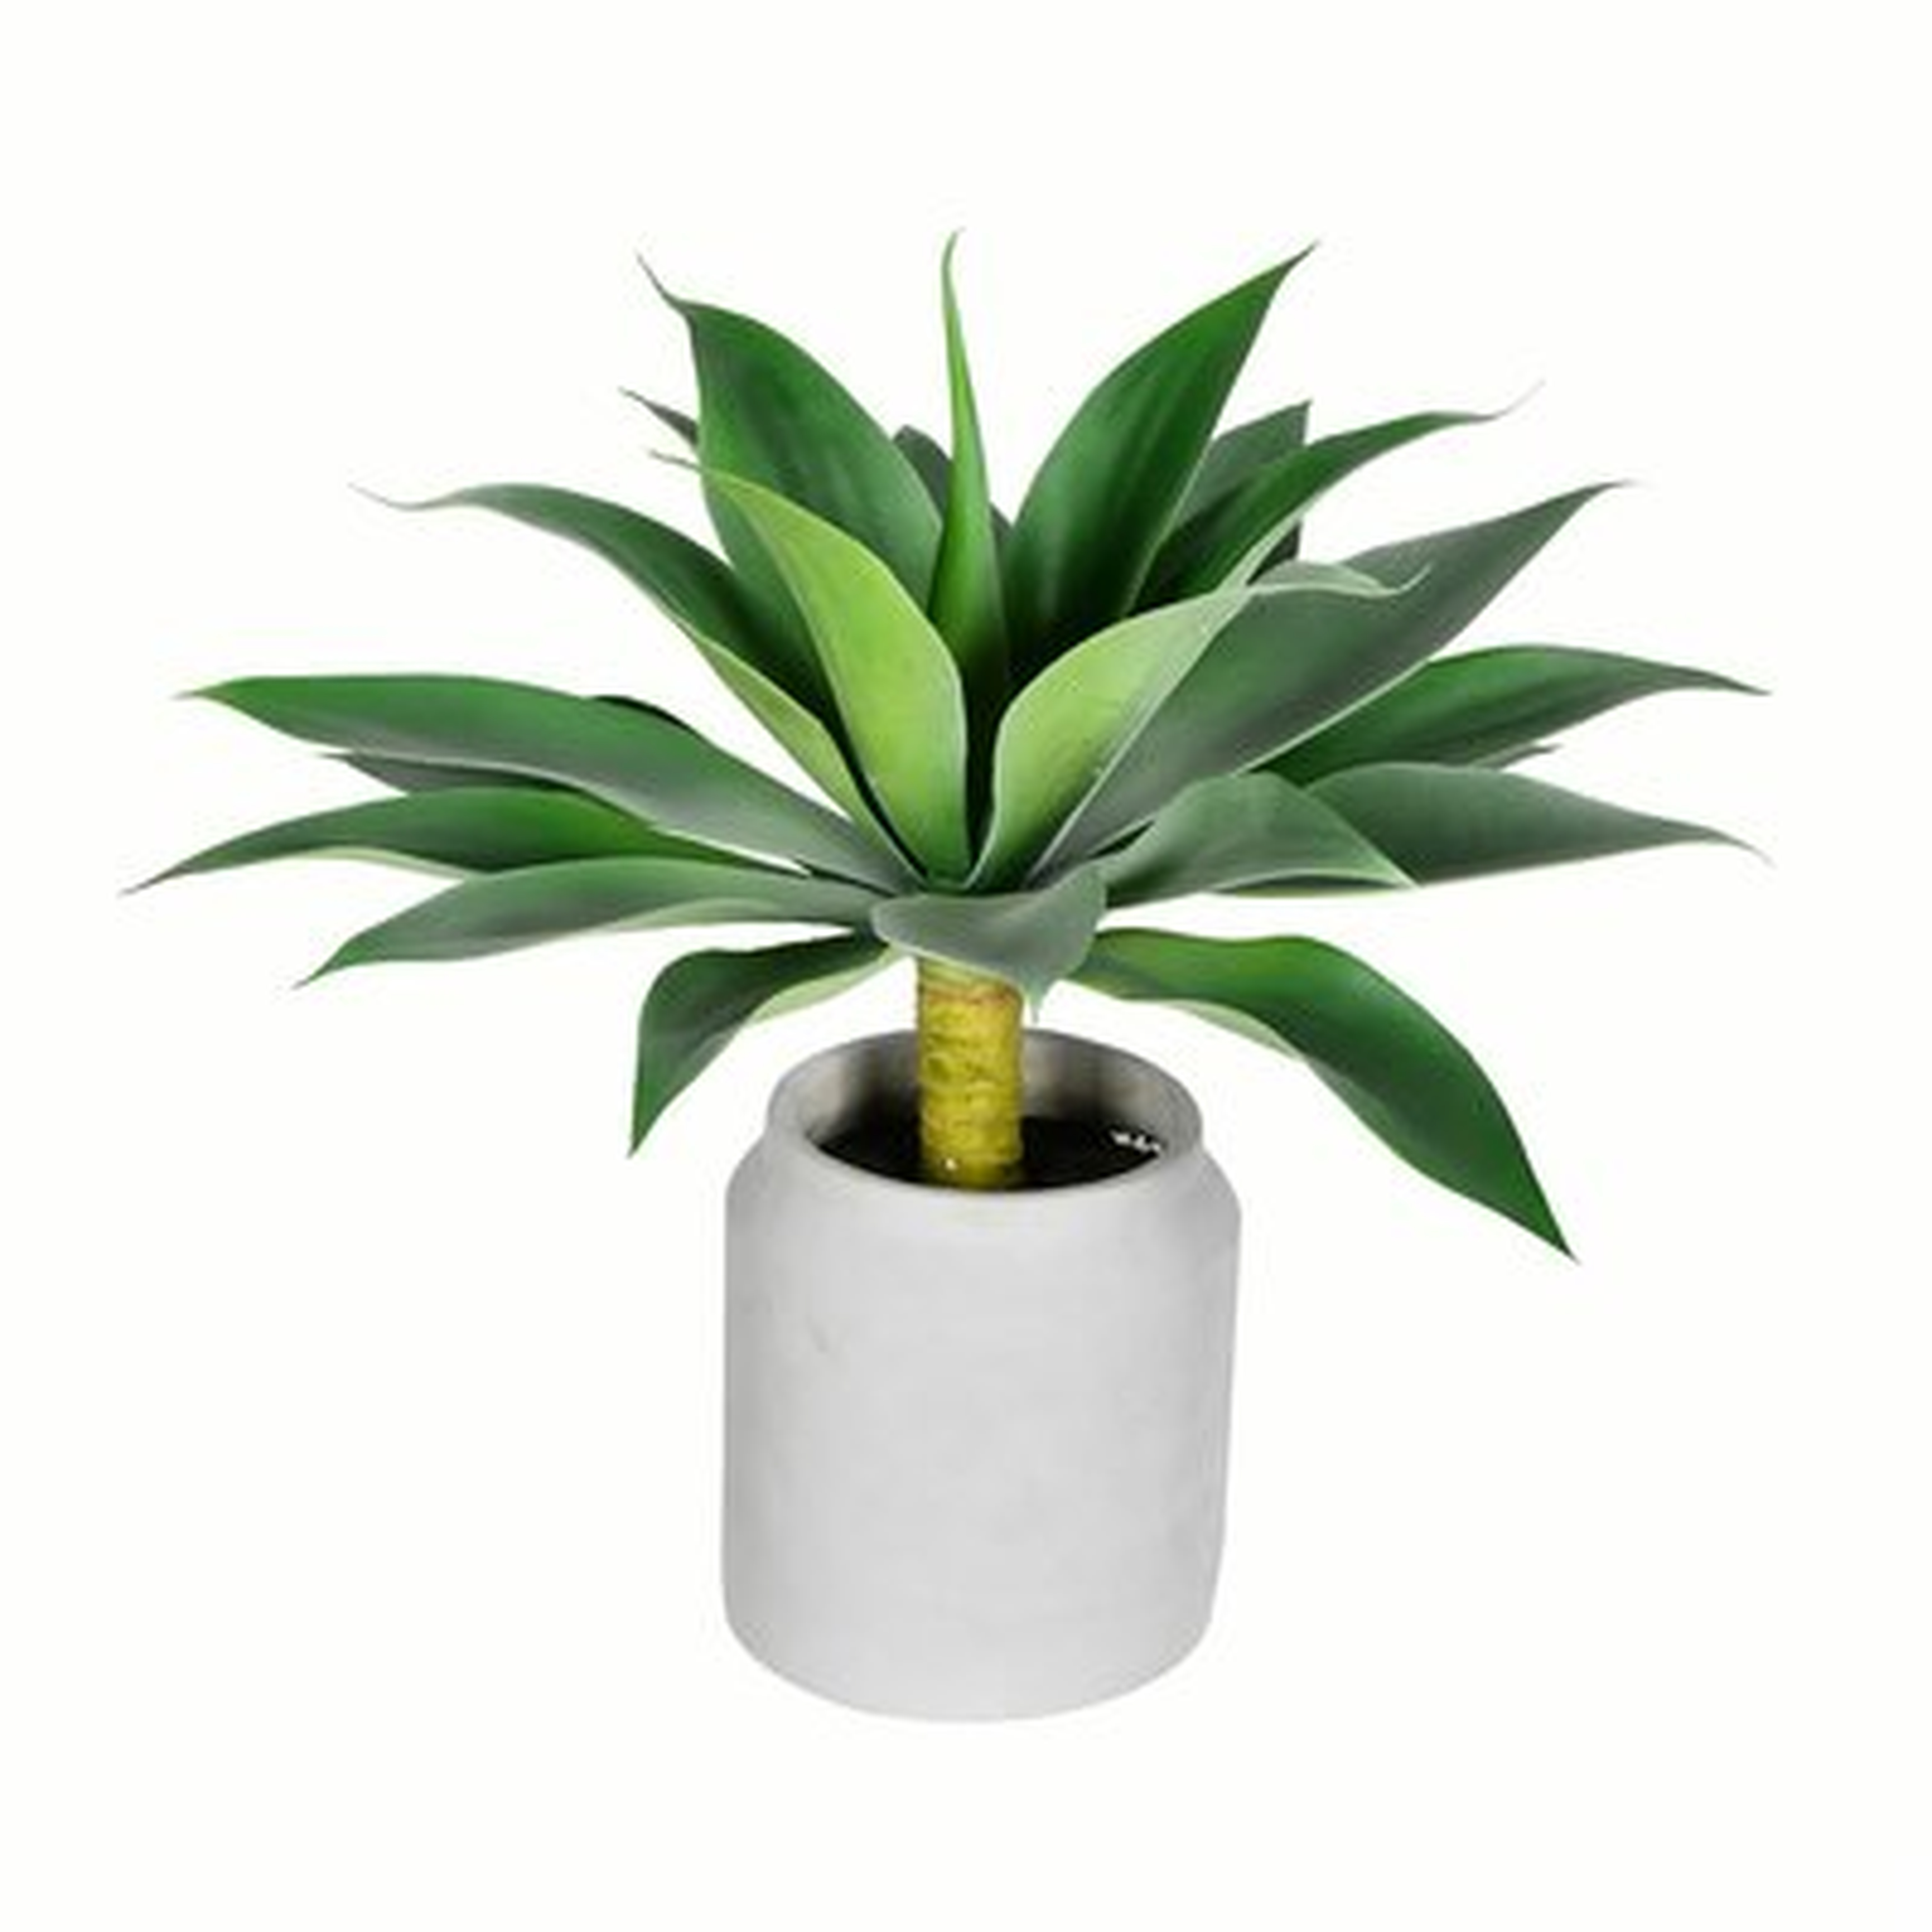 Artificial Agave Plant in Pot - Wayfair